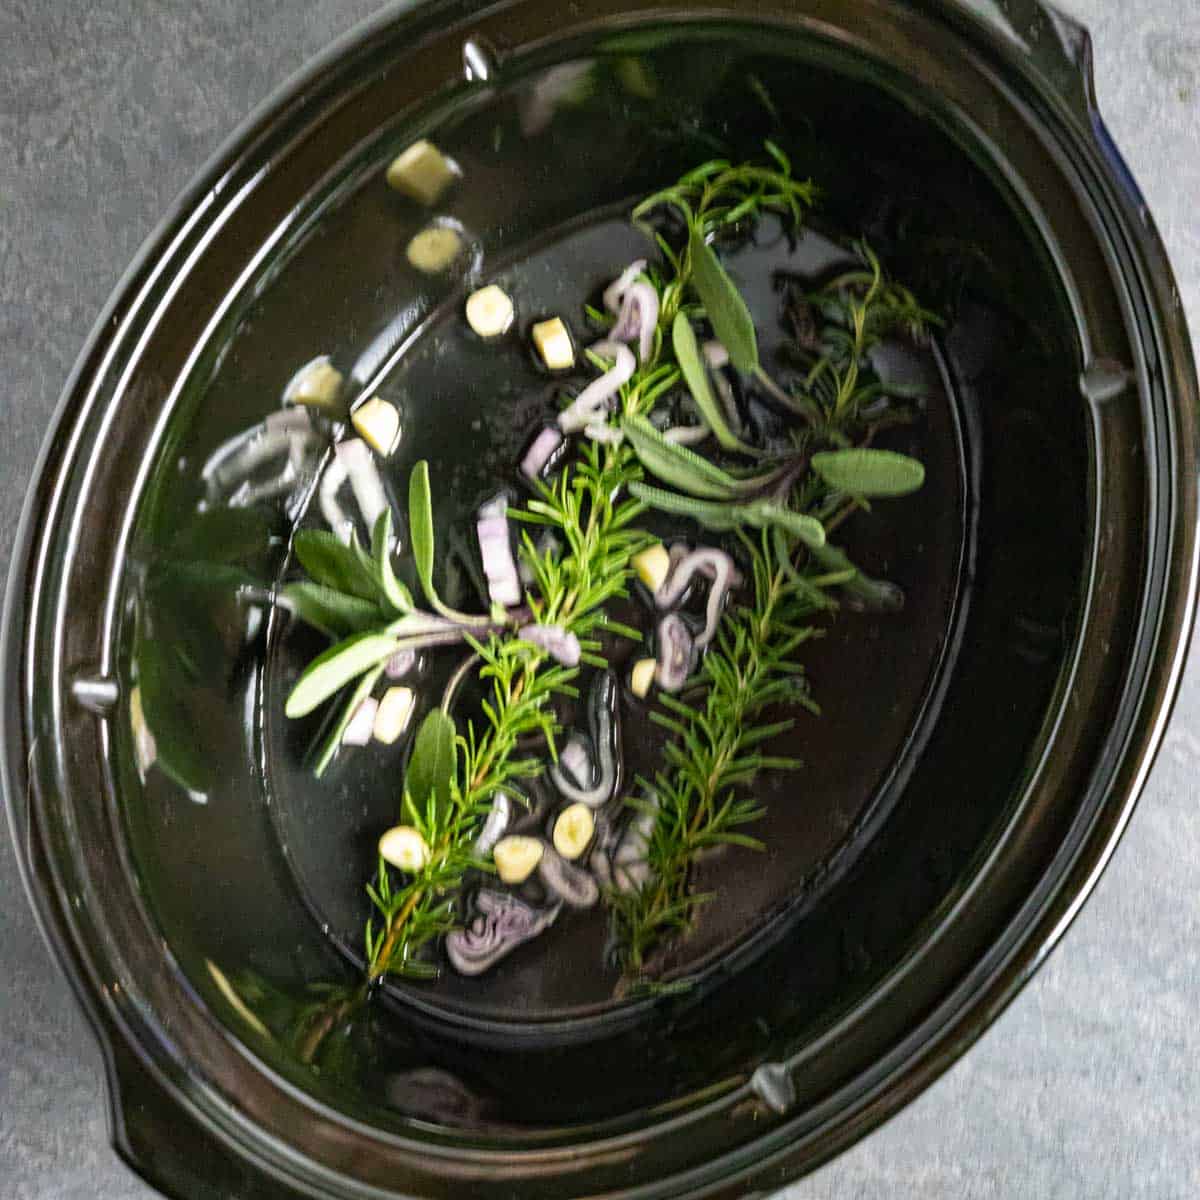 Fresh herbs in bottom of a crock pot including sage, rosemary and shallots.